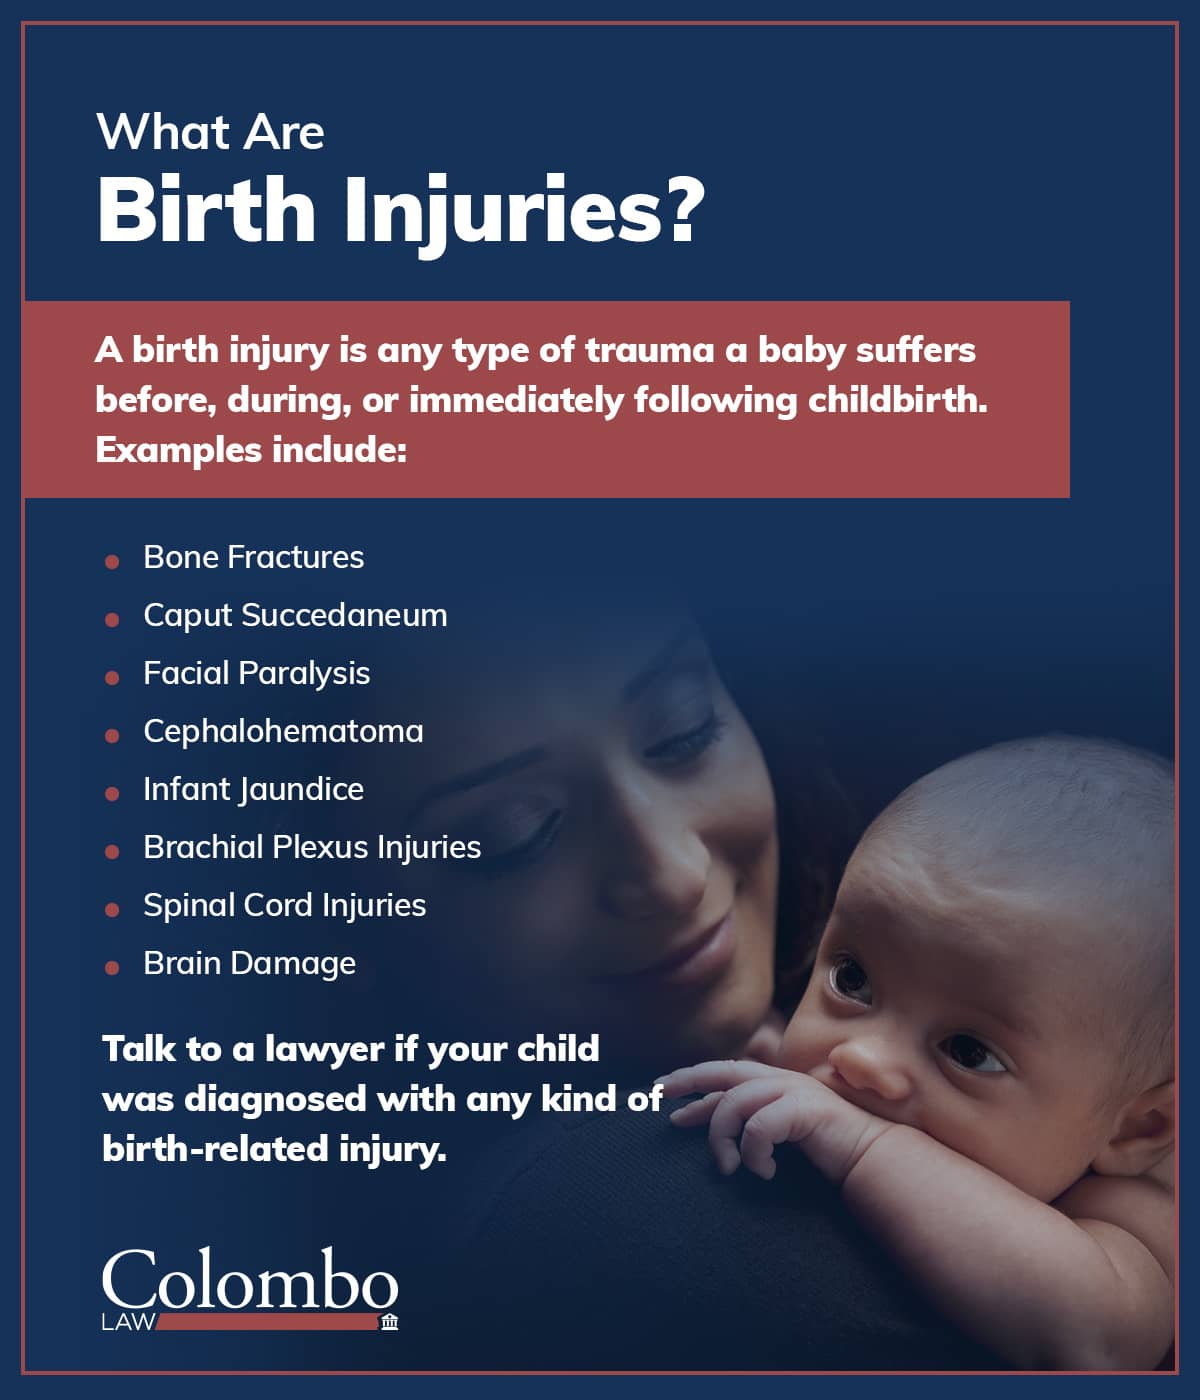 what are birth injuries?